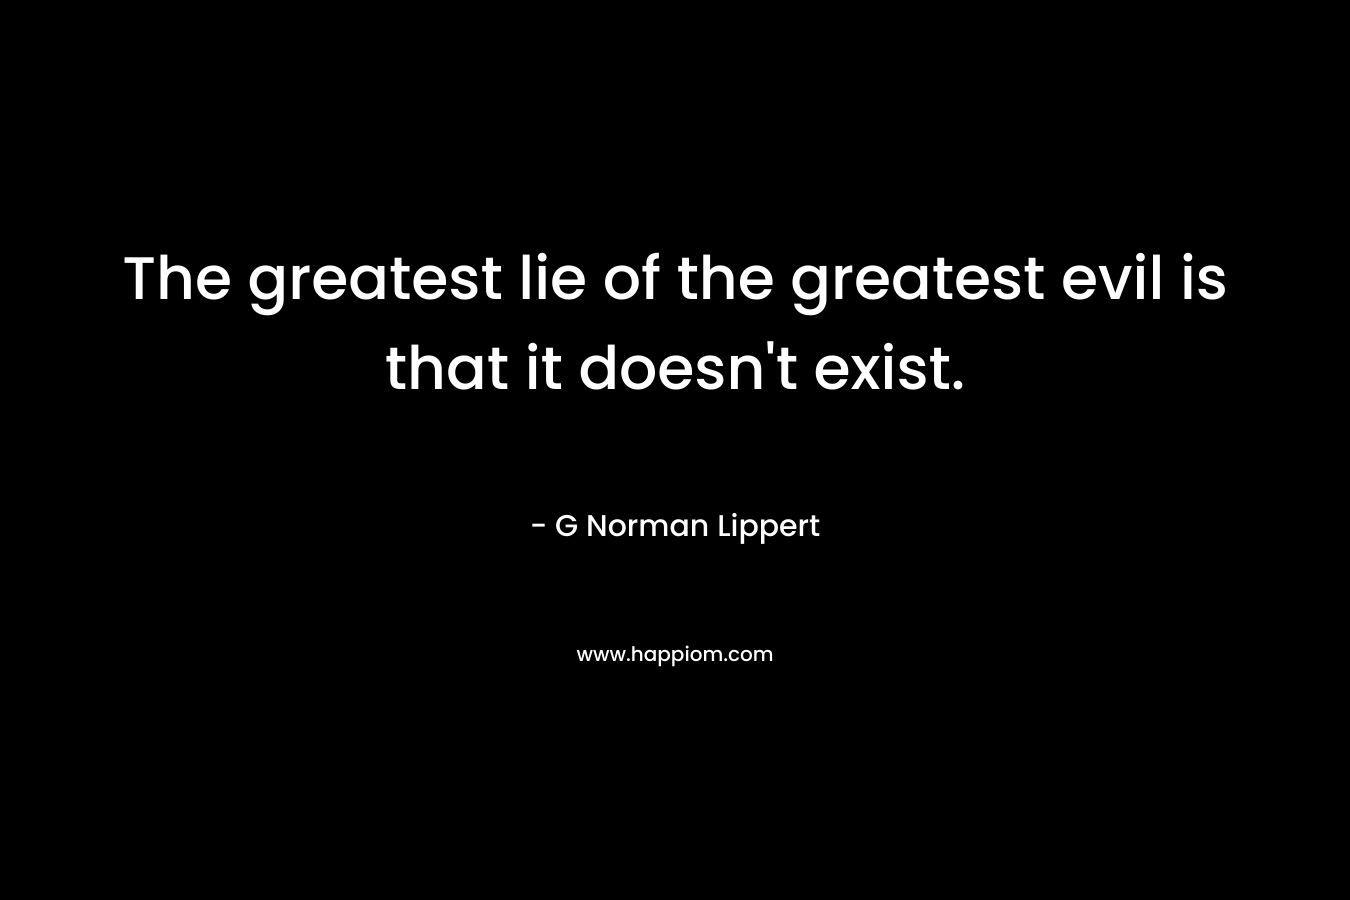 The greatest lie of the greatest evil is that it doesn't exist.